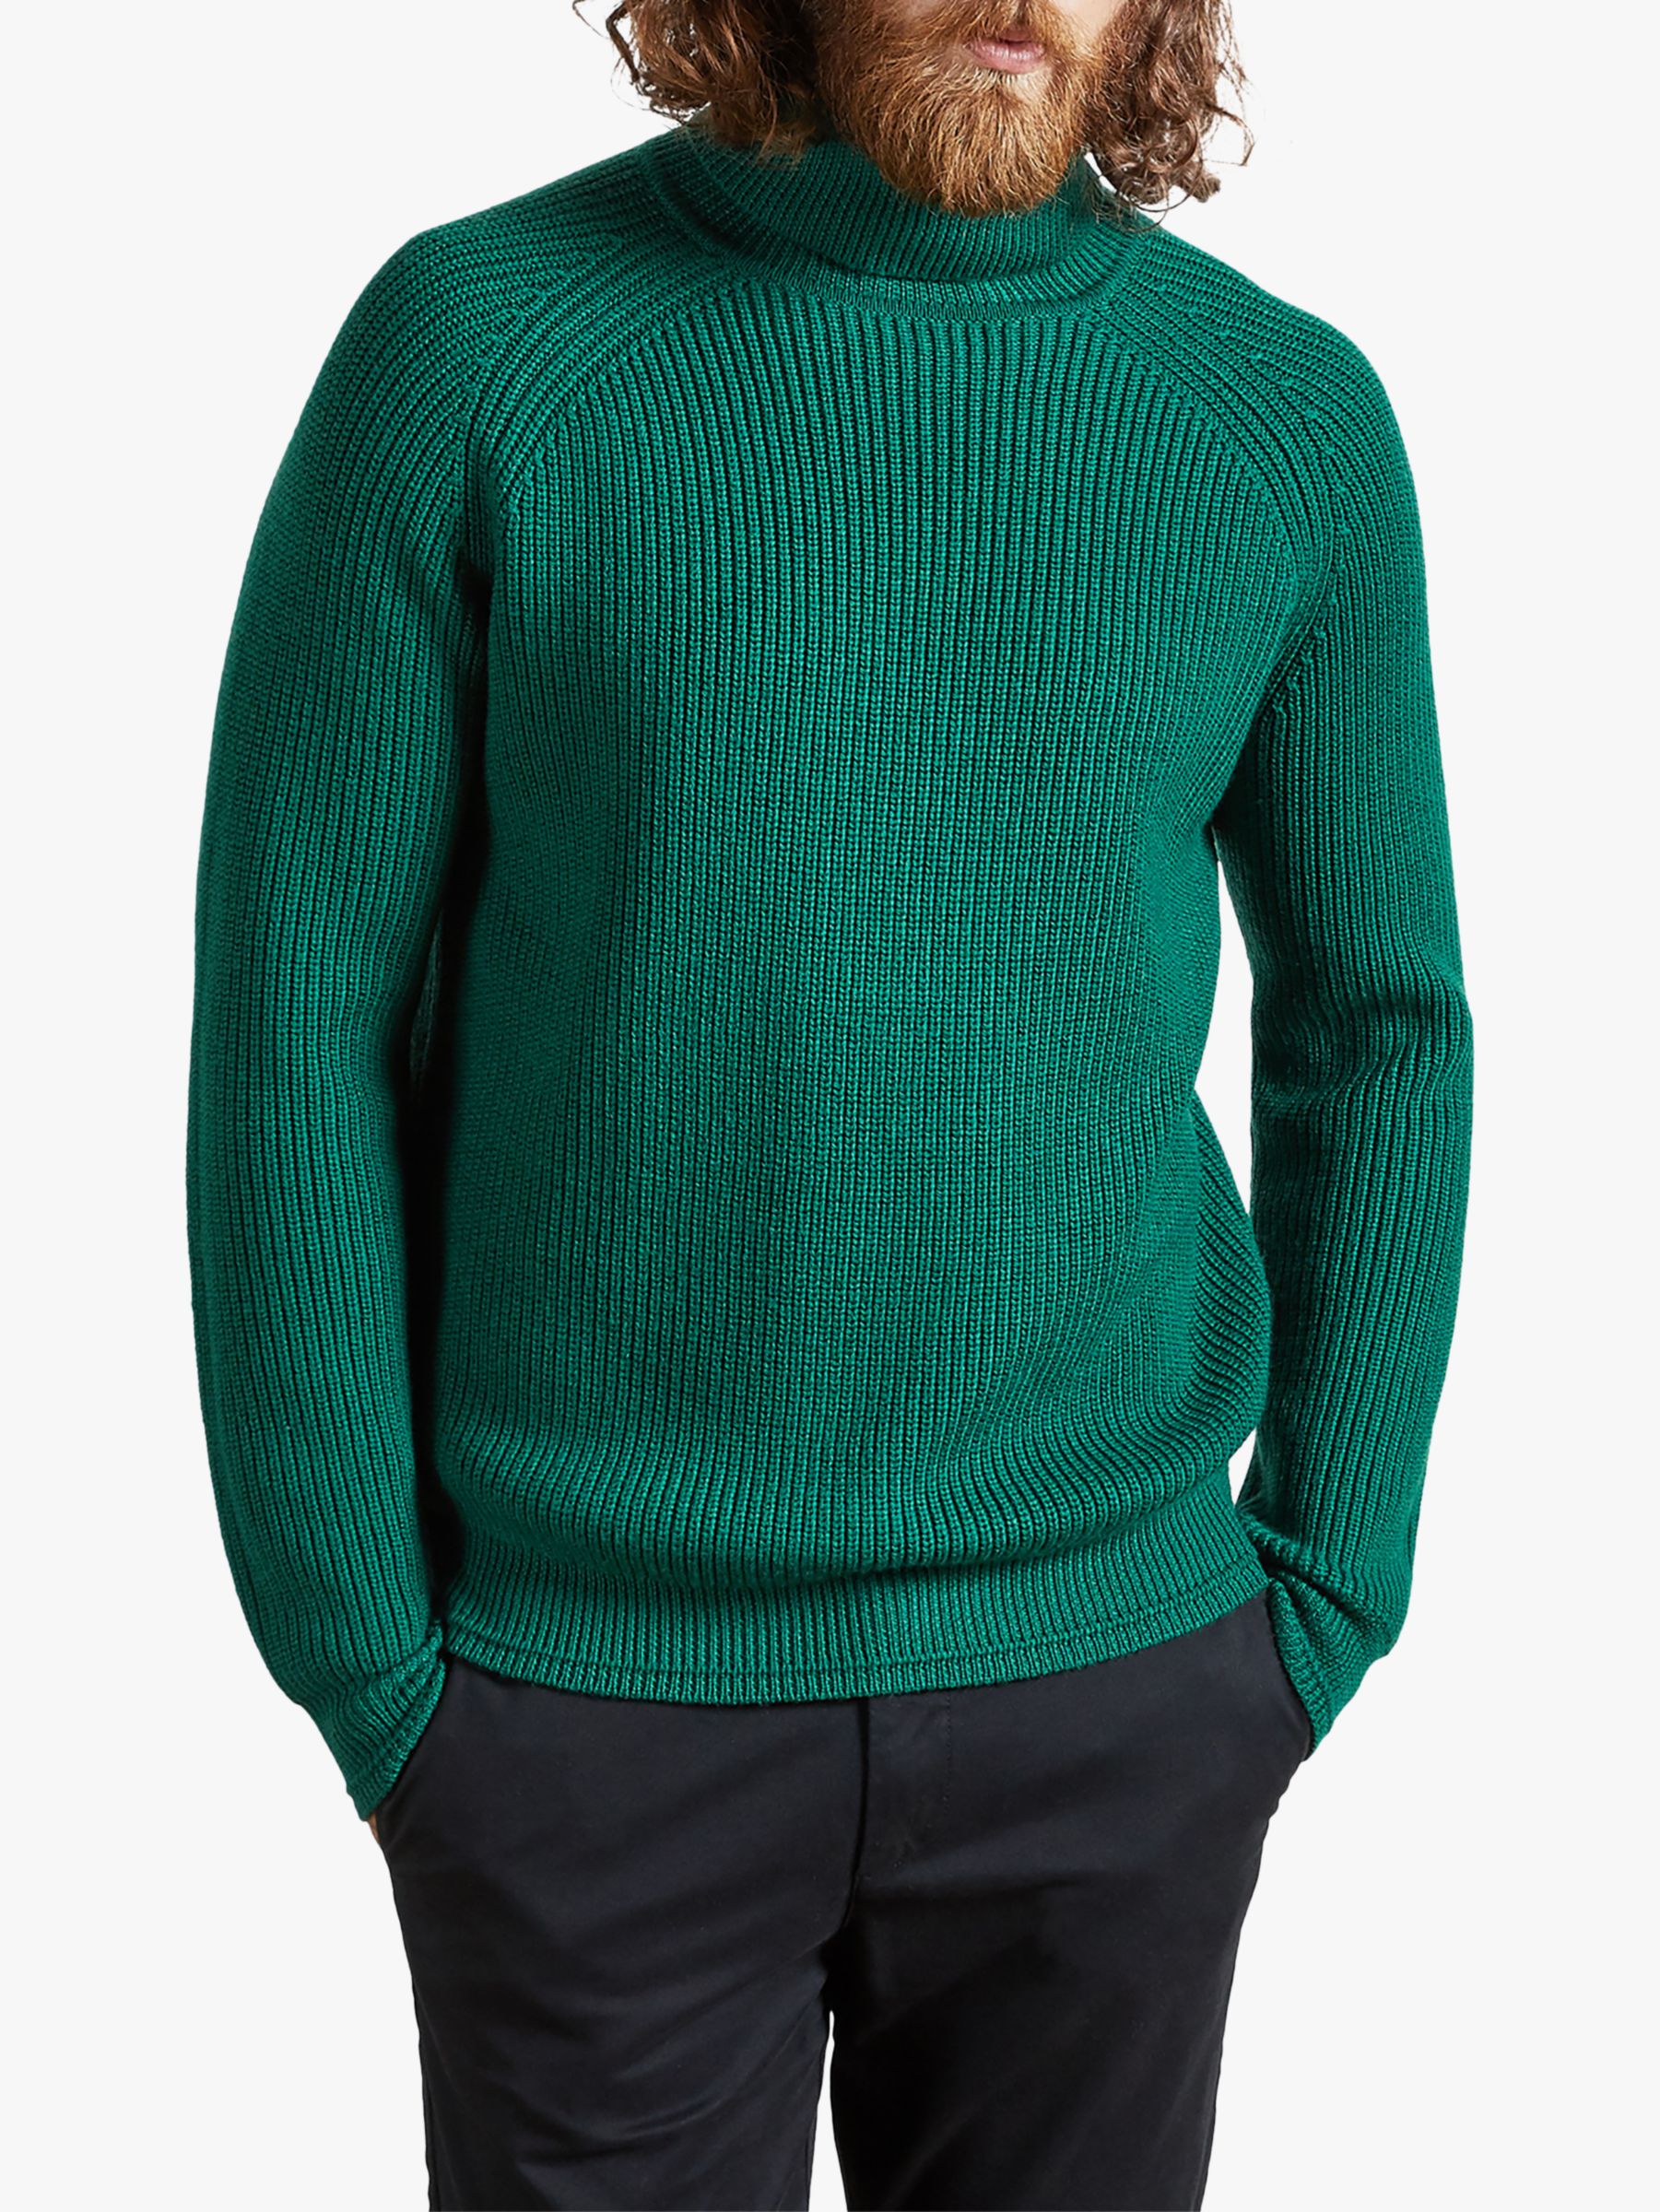 Ted Baker Noodles Chunky Roll Neck Knit Jumper, Mid Green at John Lewis ...